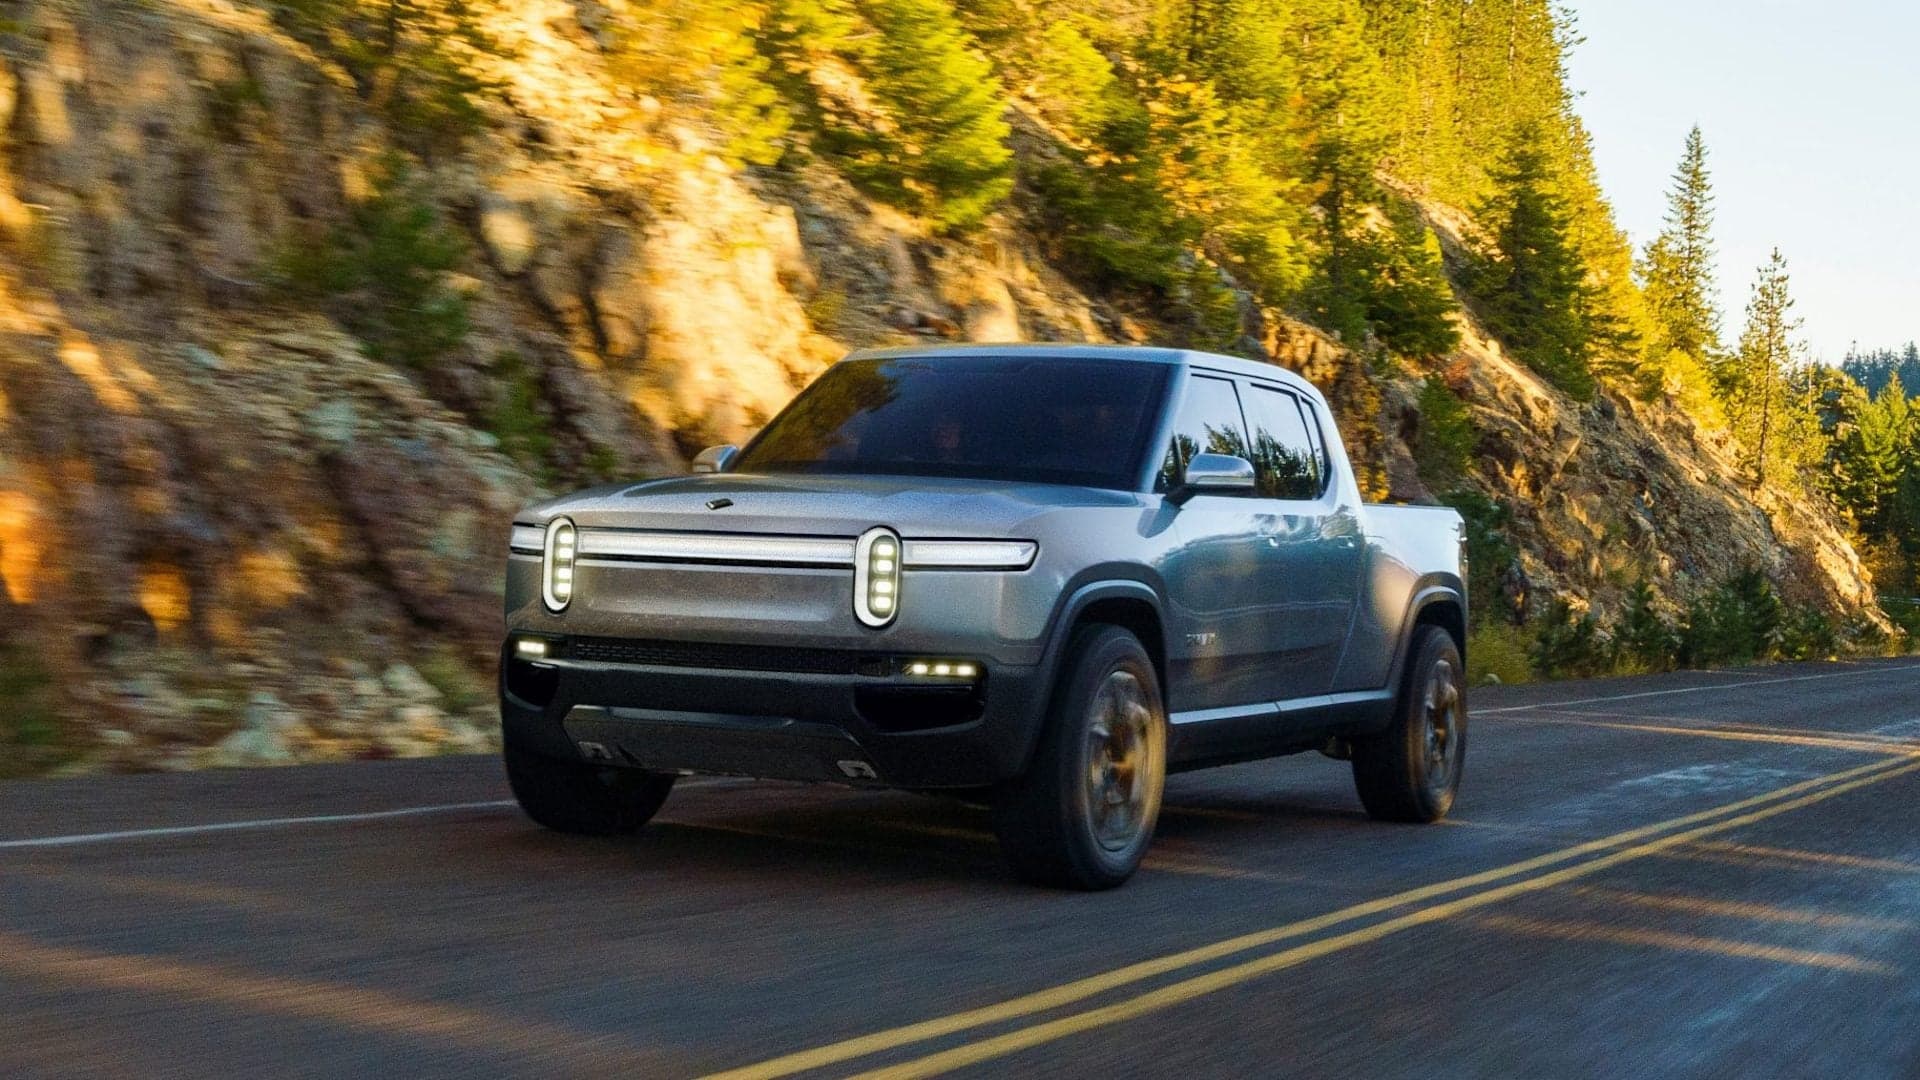 Rivian Is Secretly Camouflaging Its R1T Pickup Truck as Ford F-150s for Testing